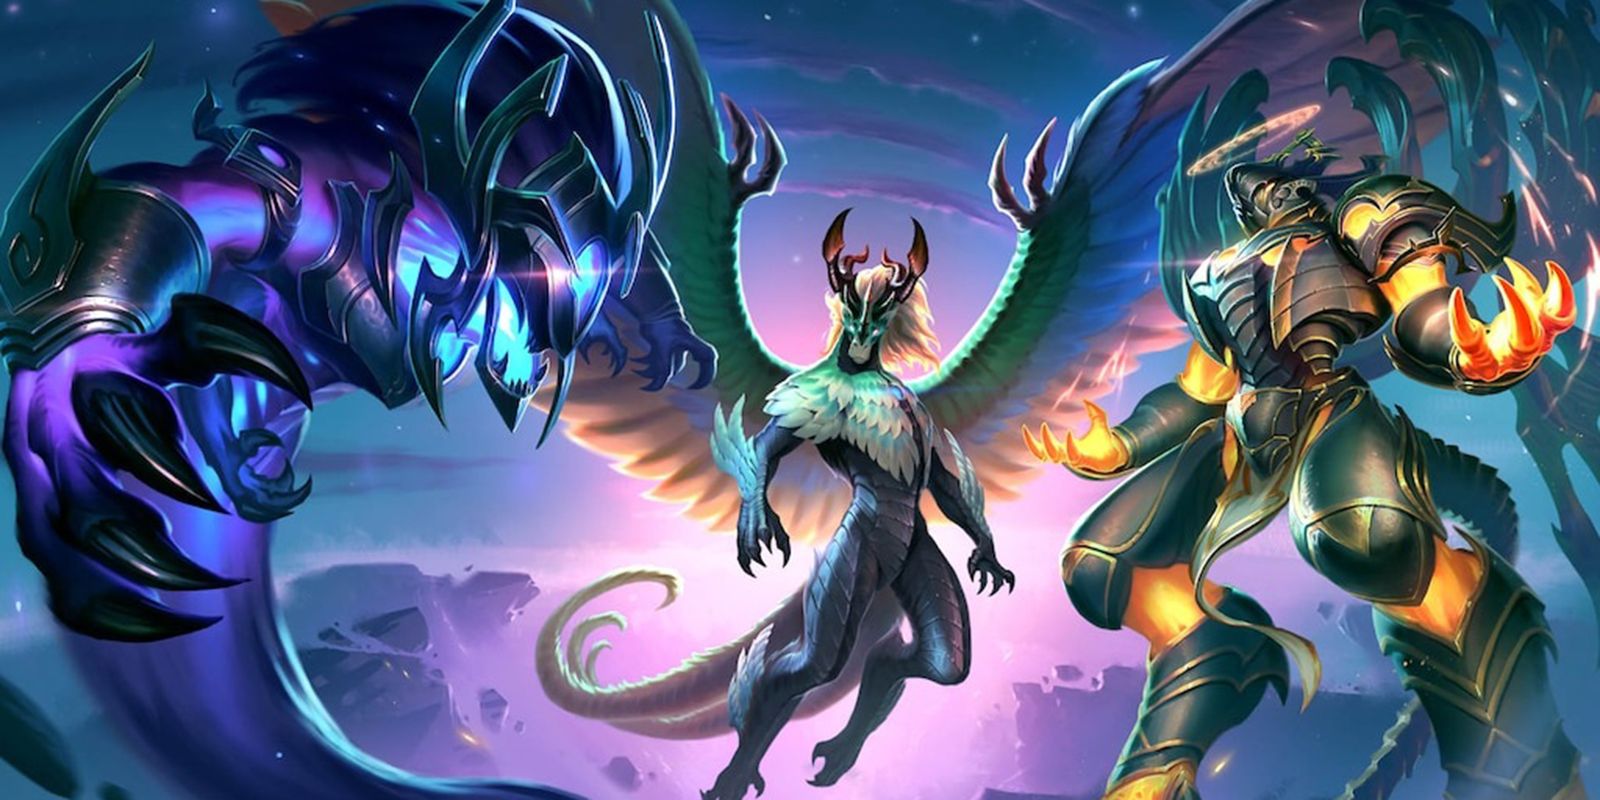 The Most Expensive Hero Skins In Smite (& How Much They Cost)